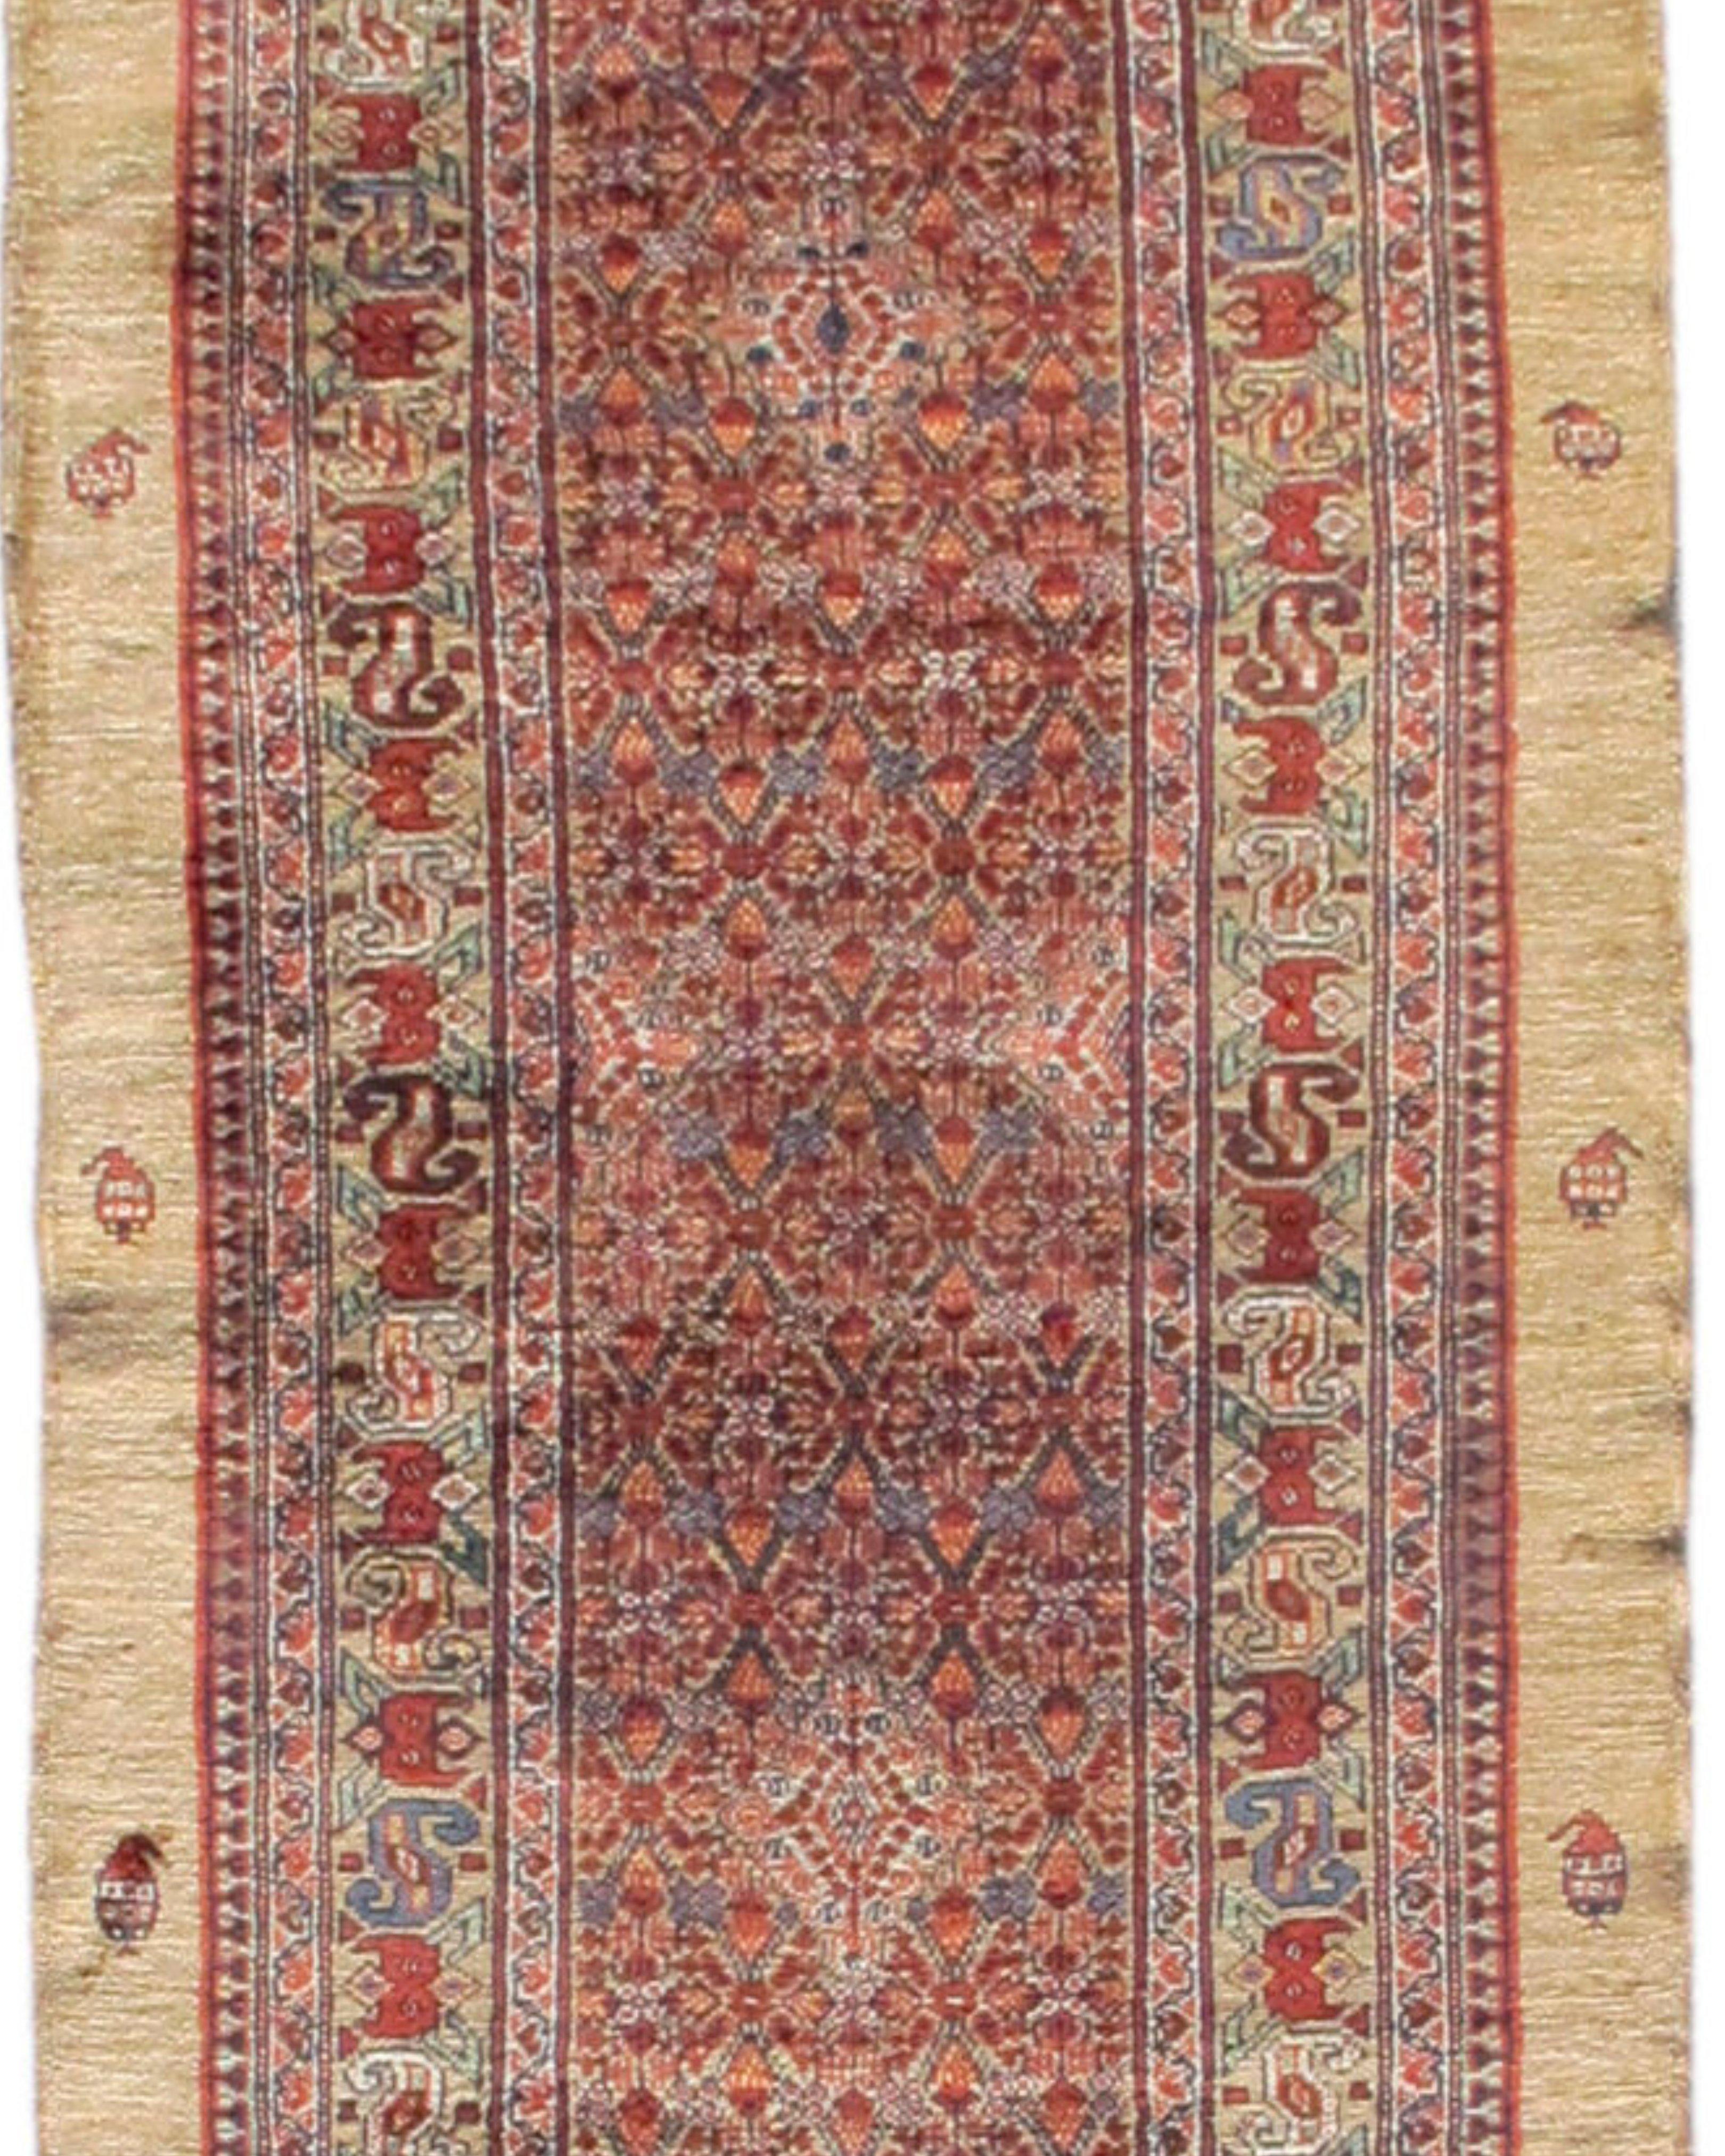 Hand-Knotted Camel Hair Hamadan Runner Rug, Early 20th century For Sale